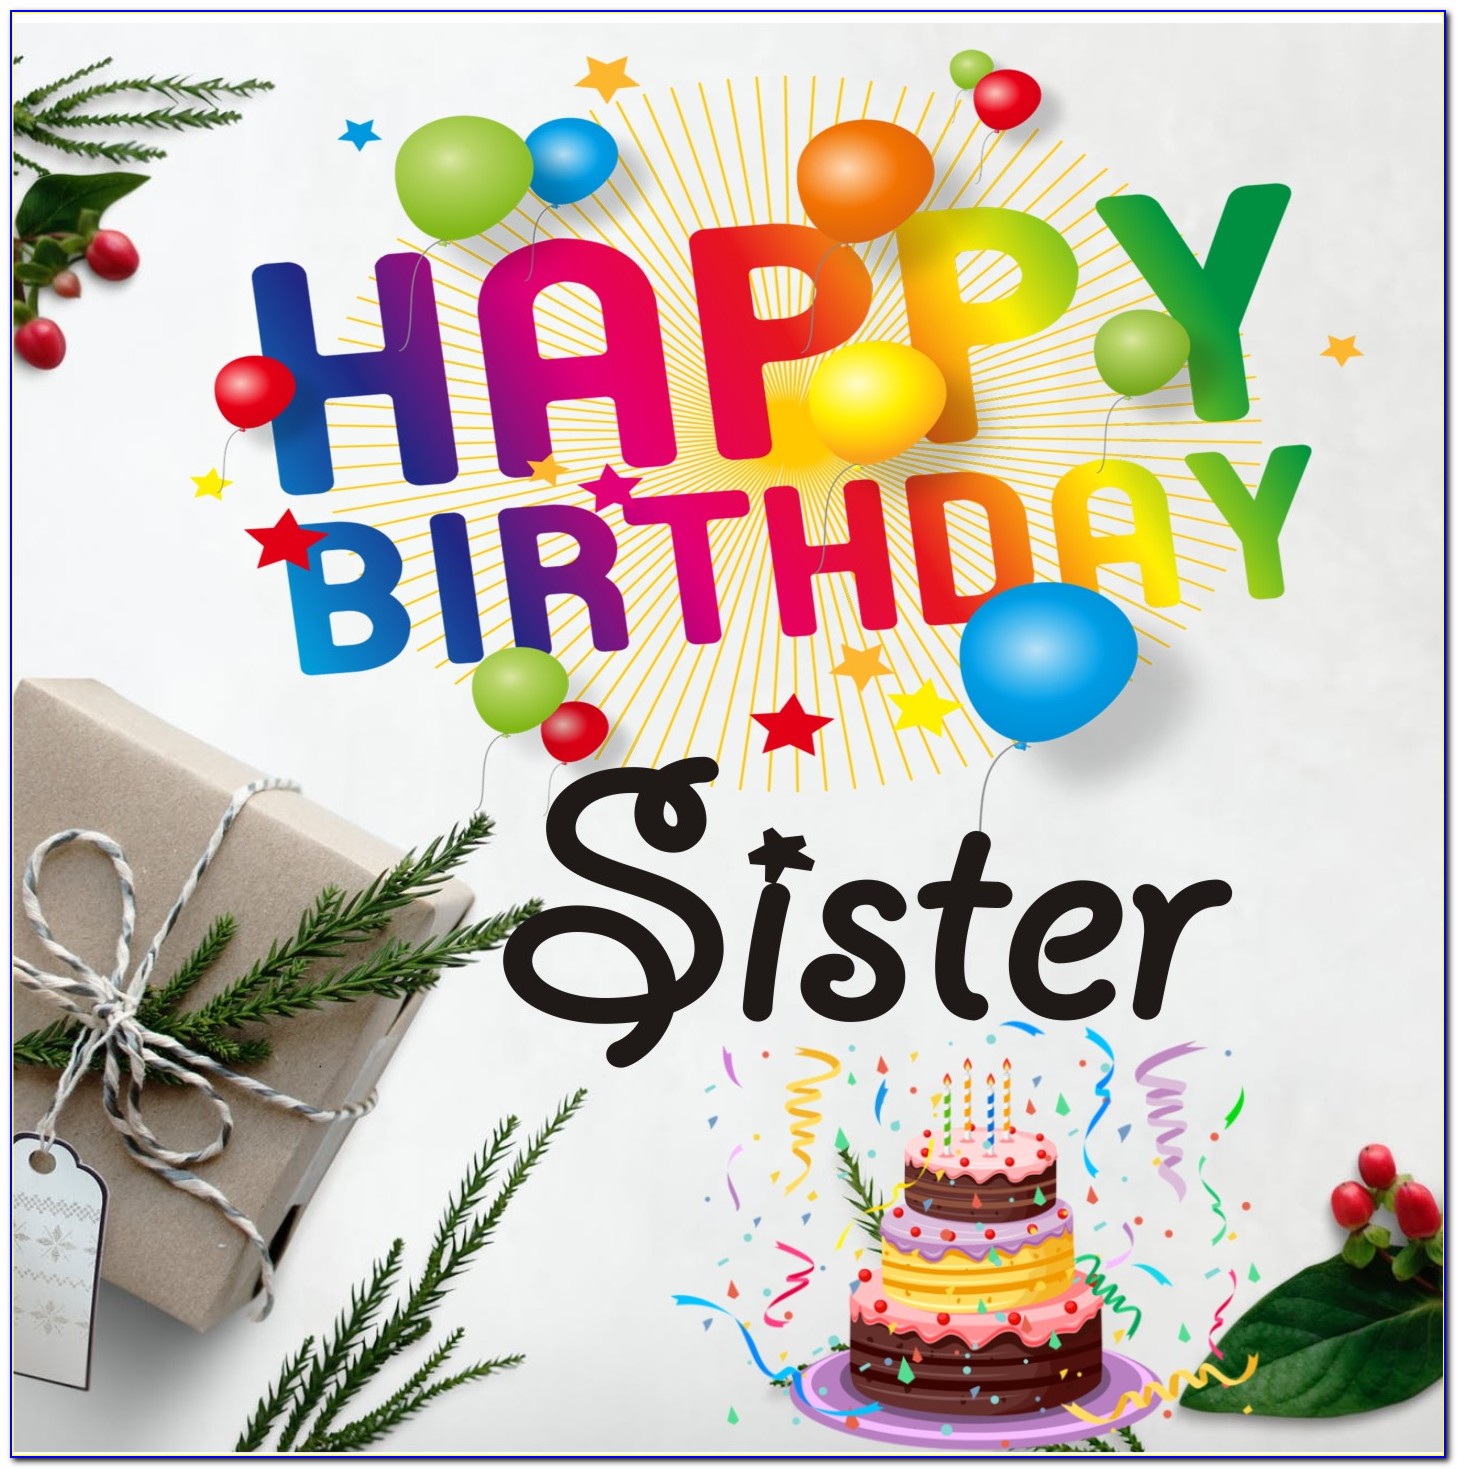 Free Birthday Card Images For Friend